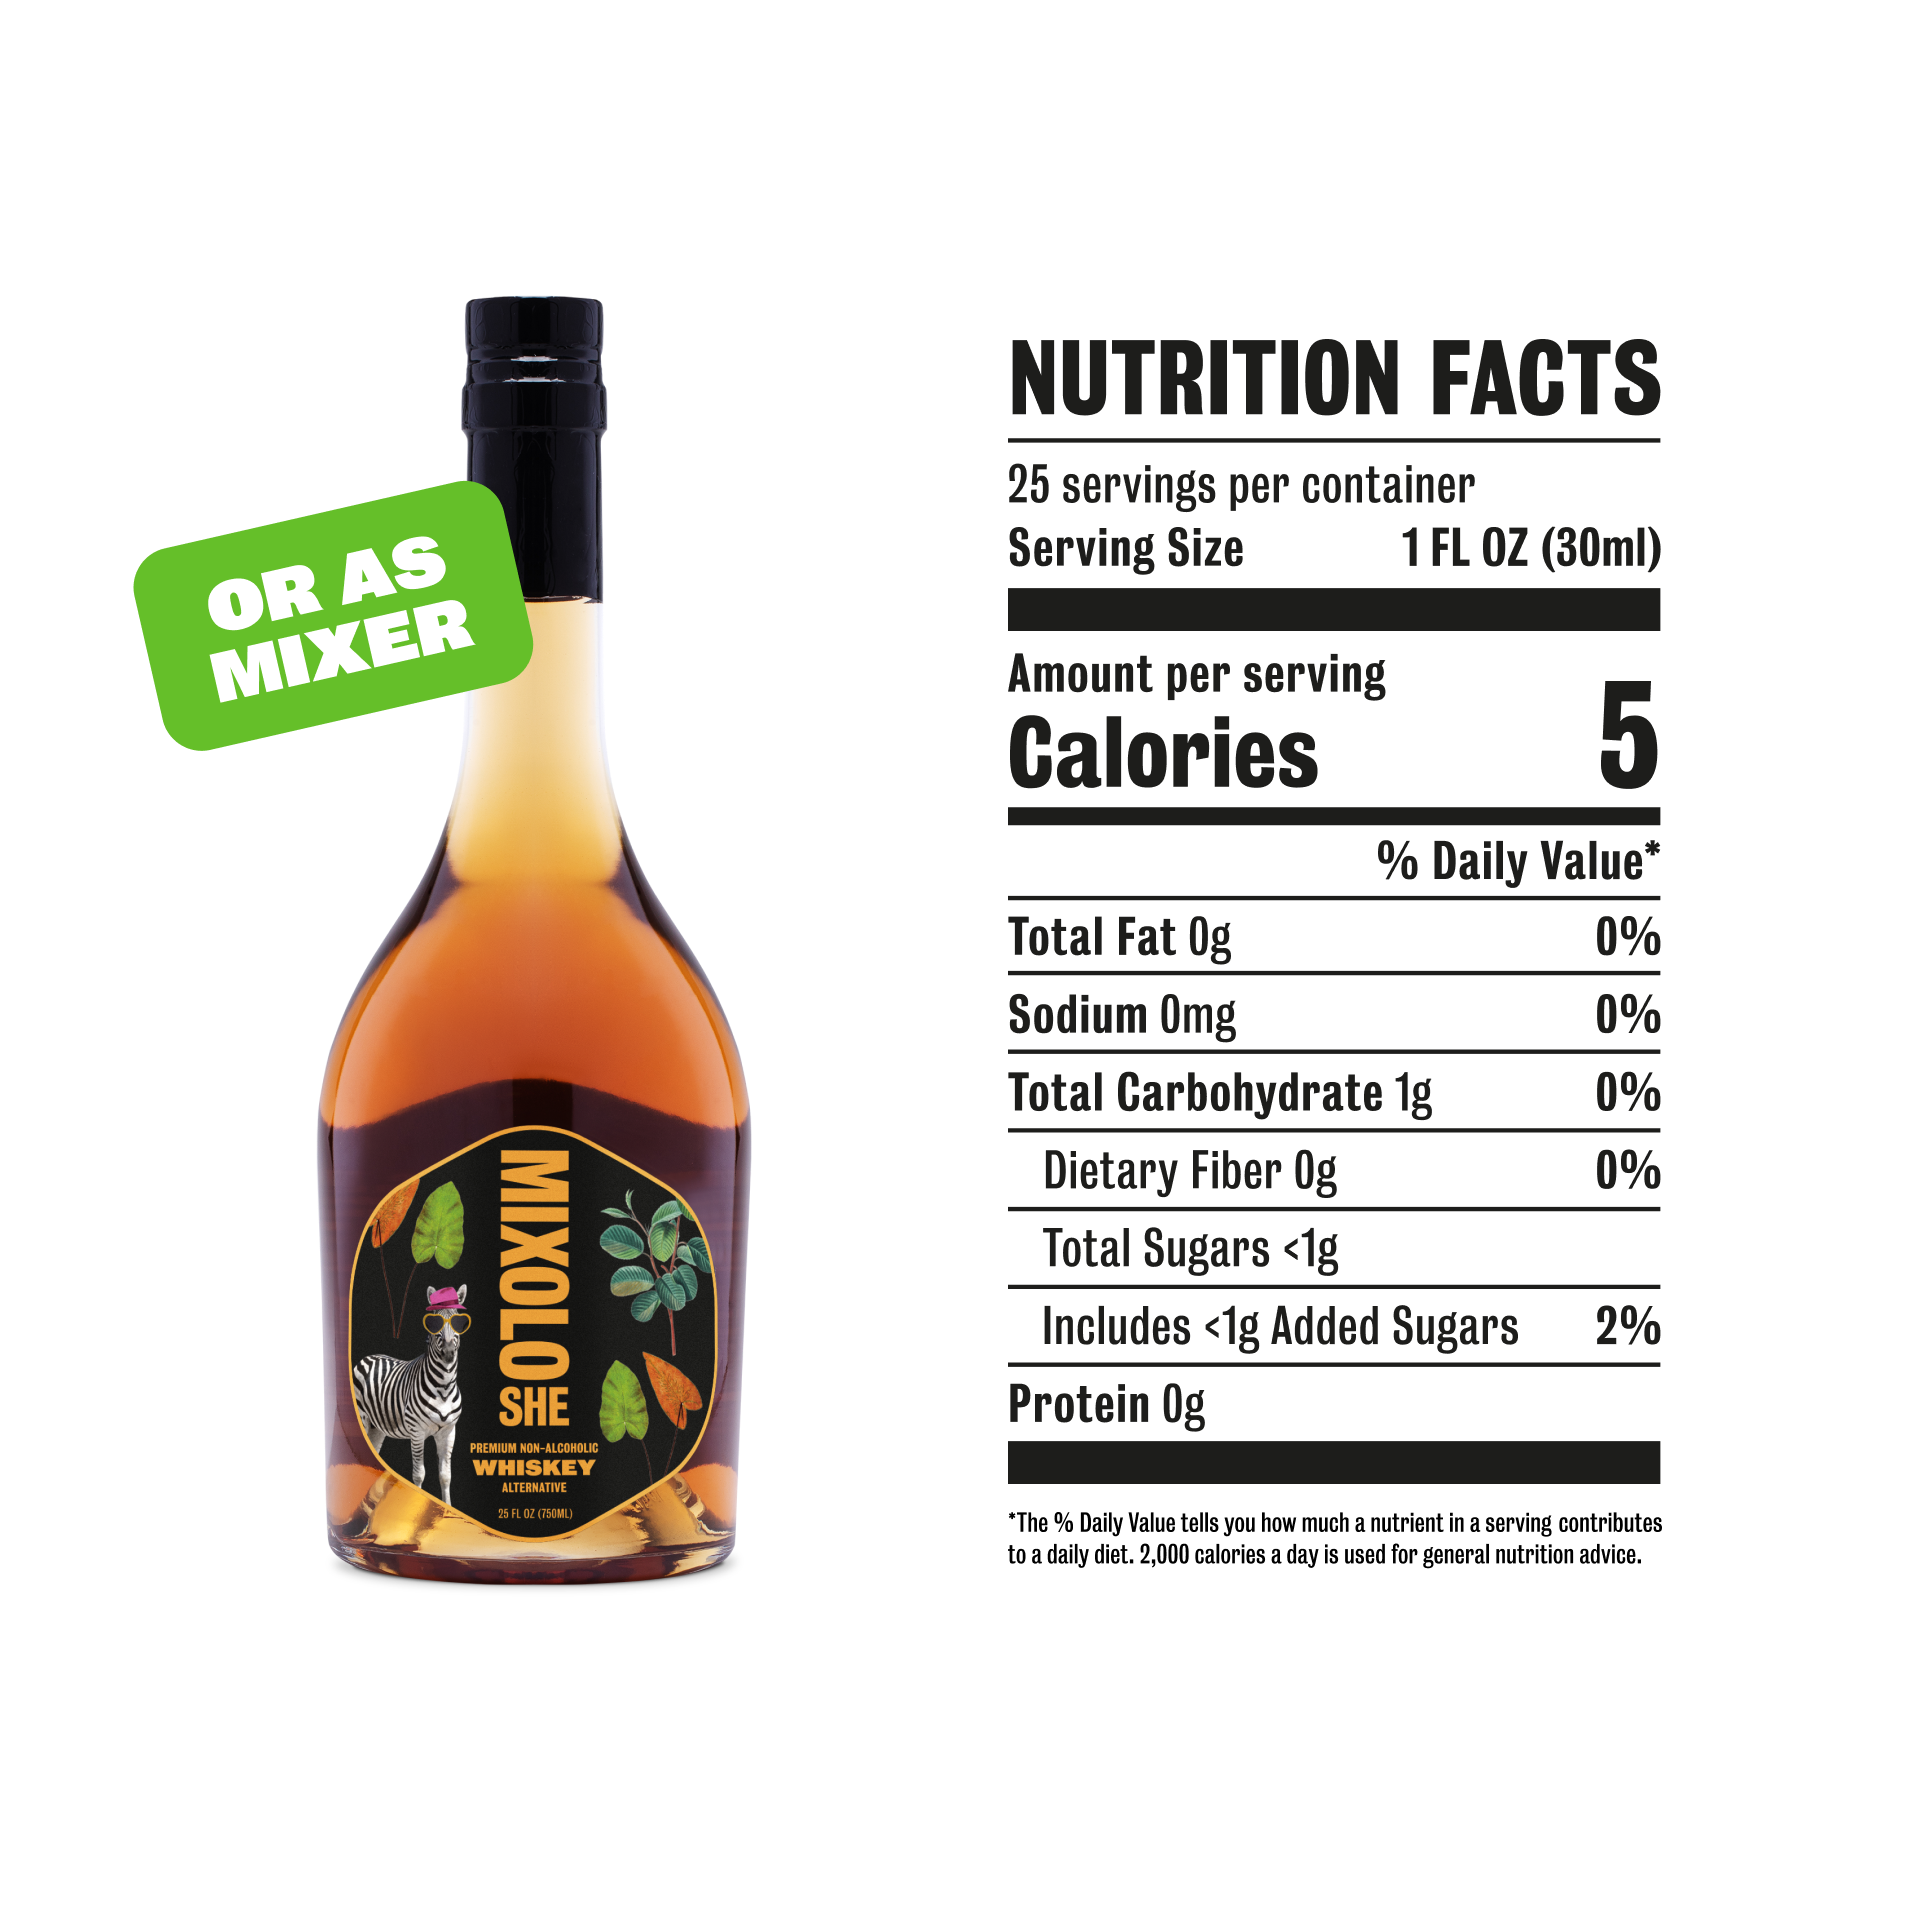 Mixoloshe Premium Non-Alcoholic Whiskey Nutrition Facts - only 5 Calories per 1 fl oz serving